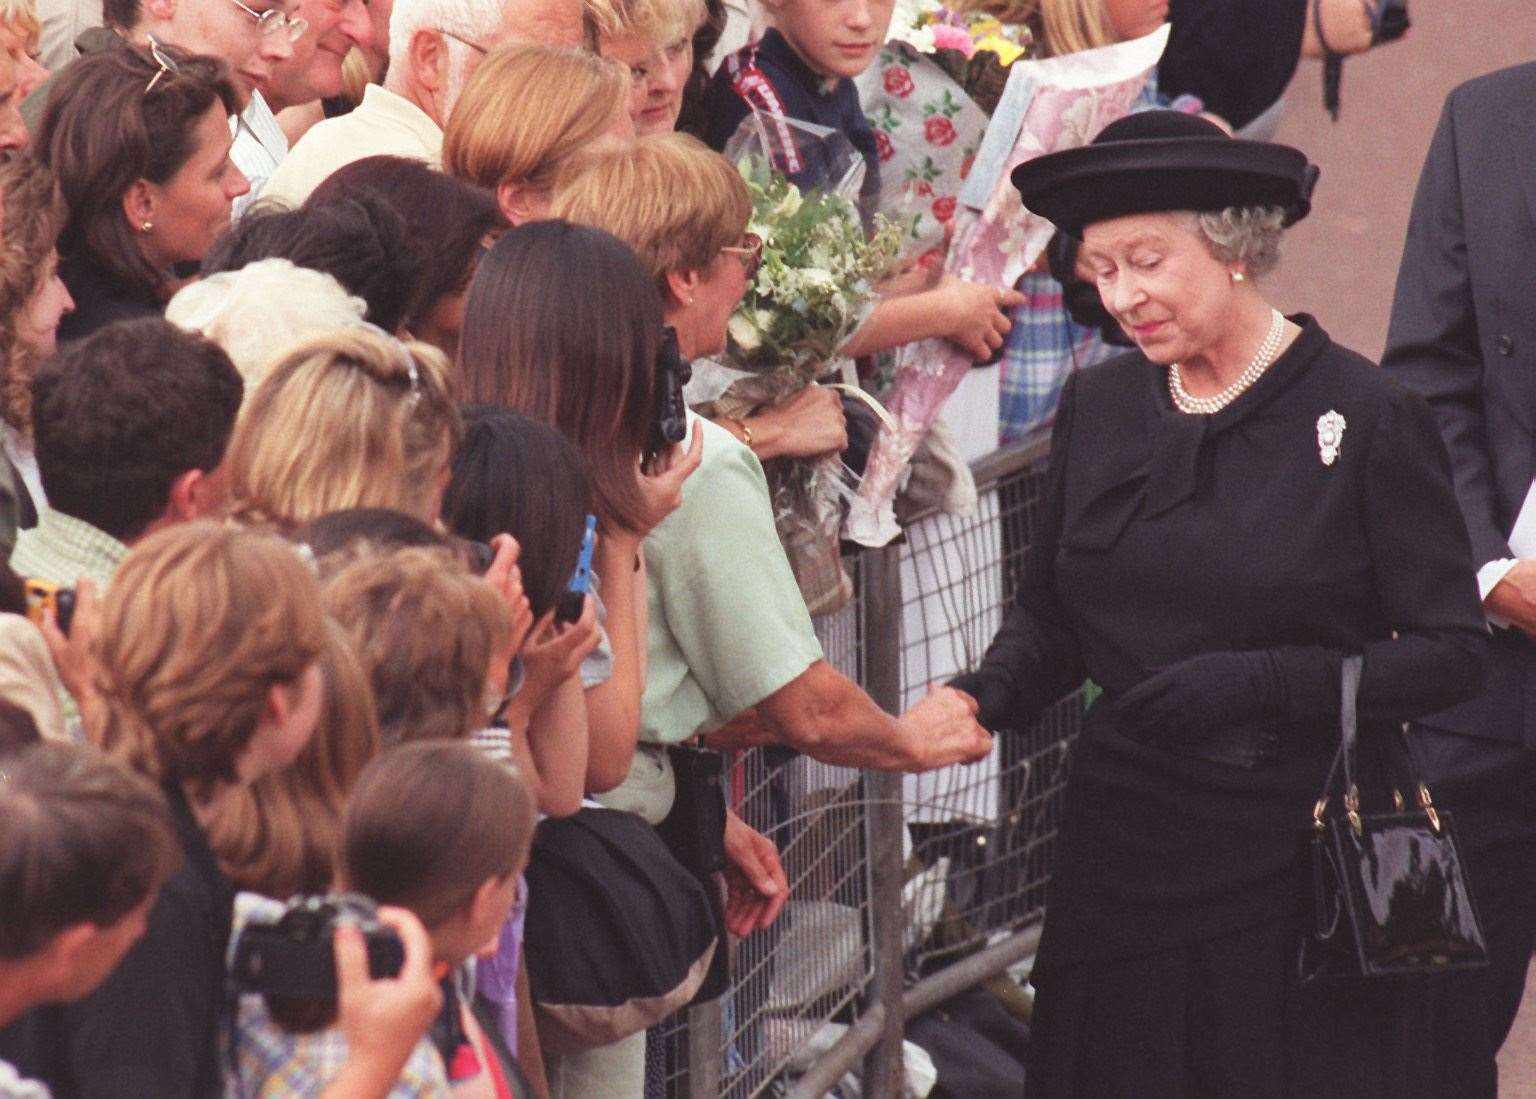 Dressed in black, the Queen meets the crowds of mourners outside Buckingham Palace after arriving for the funeral of her former daughter-in-law Diana, Princess of Wales (John Giles/PA)